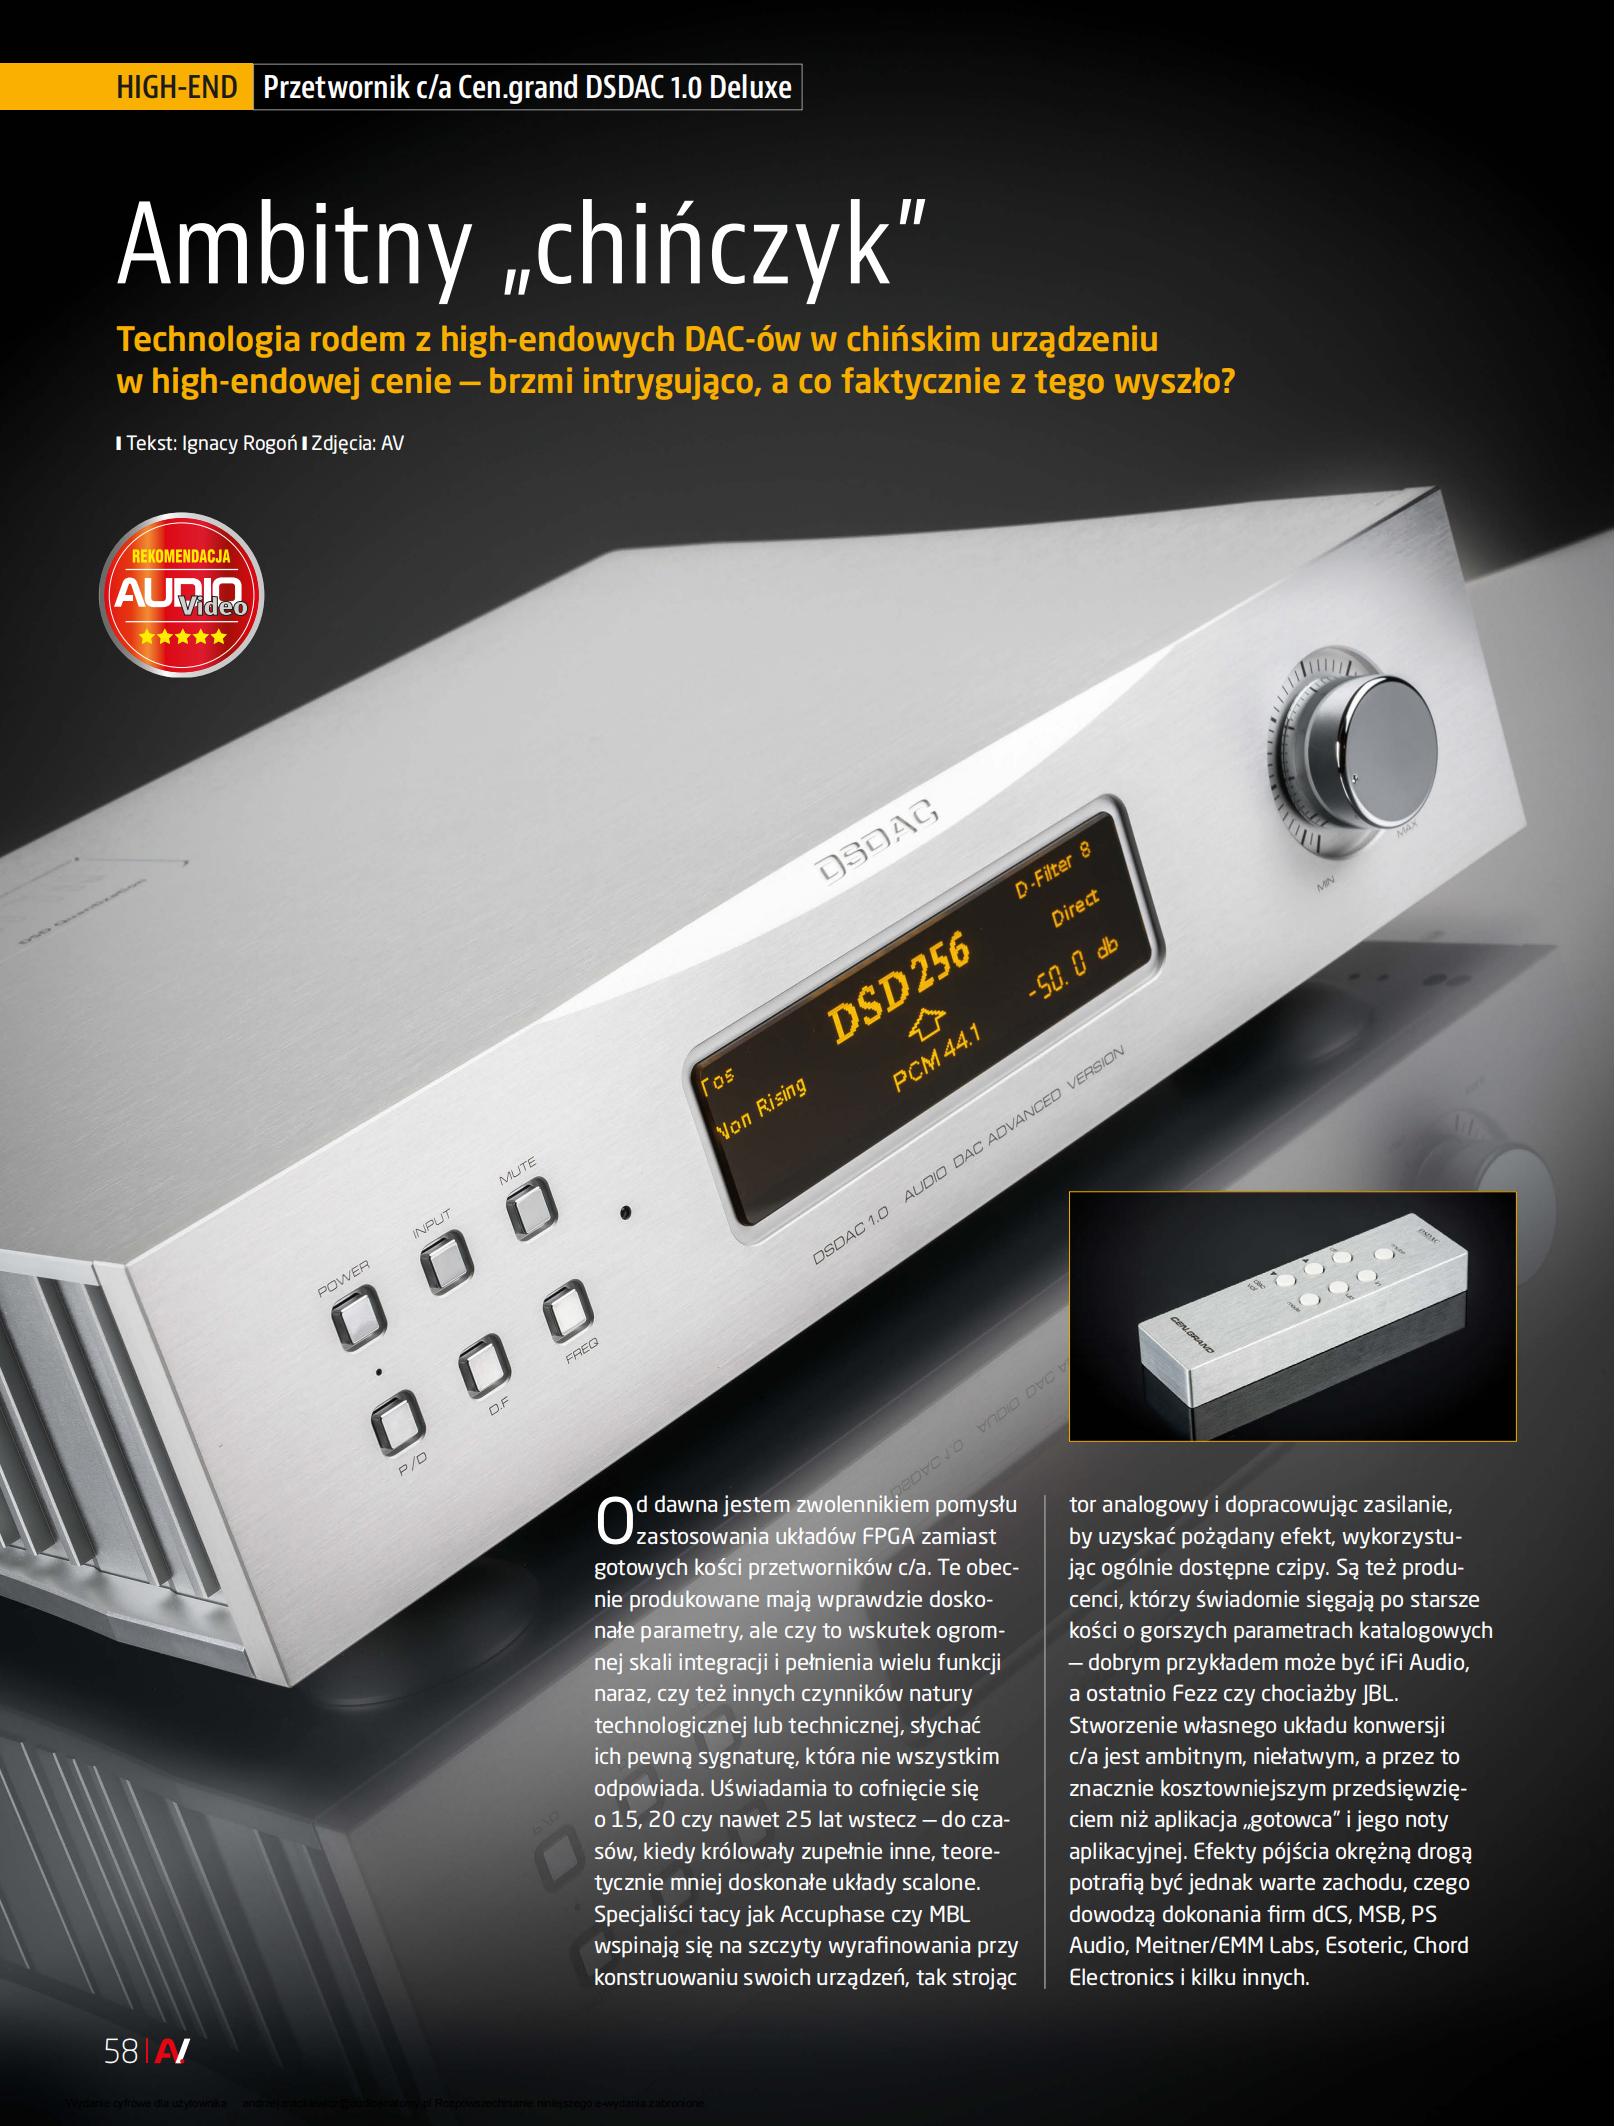 Cen.Grand DSDAC1.0 Deluxe Model reviewed by Audio & Video, Poland